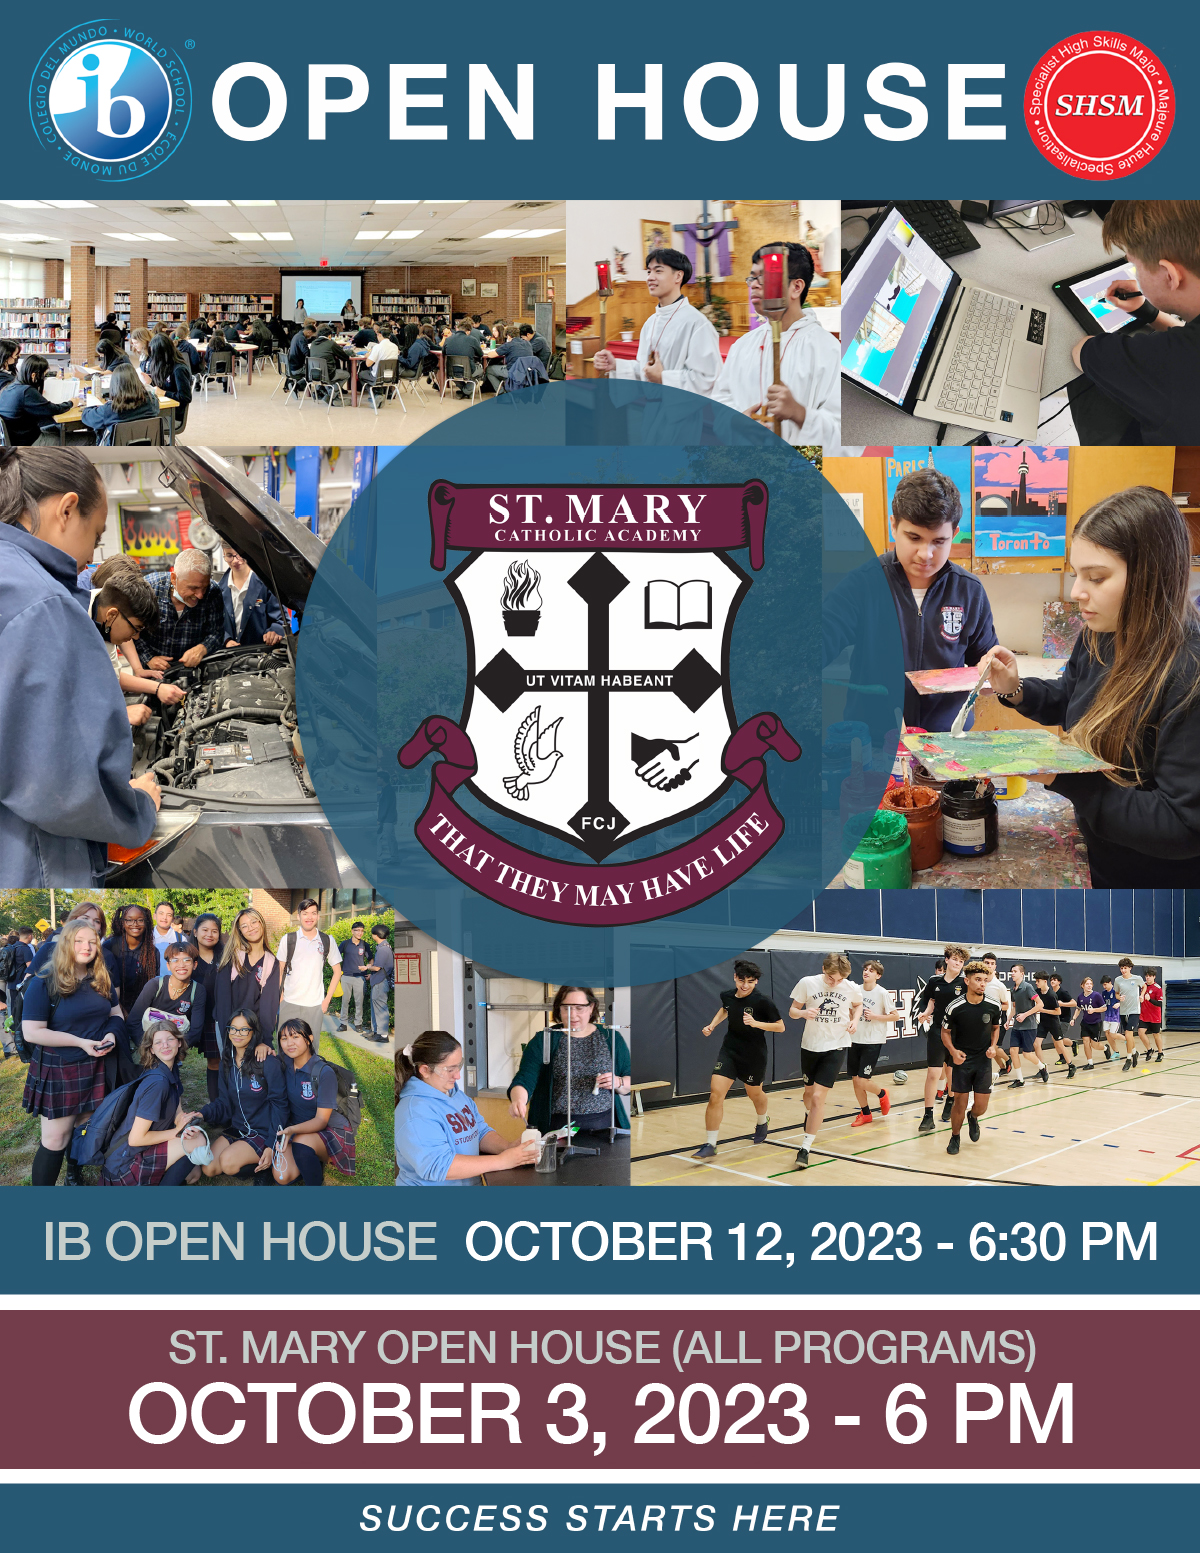 St. Mary Catholic Academy - Open House 2023 - October 3, 2023 at 6 PM for all programs and October 12, 2023 at 6:30 PM for IB